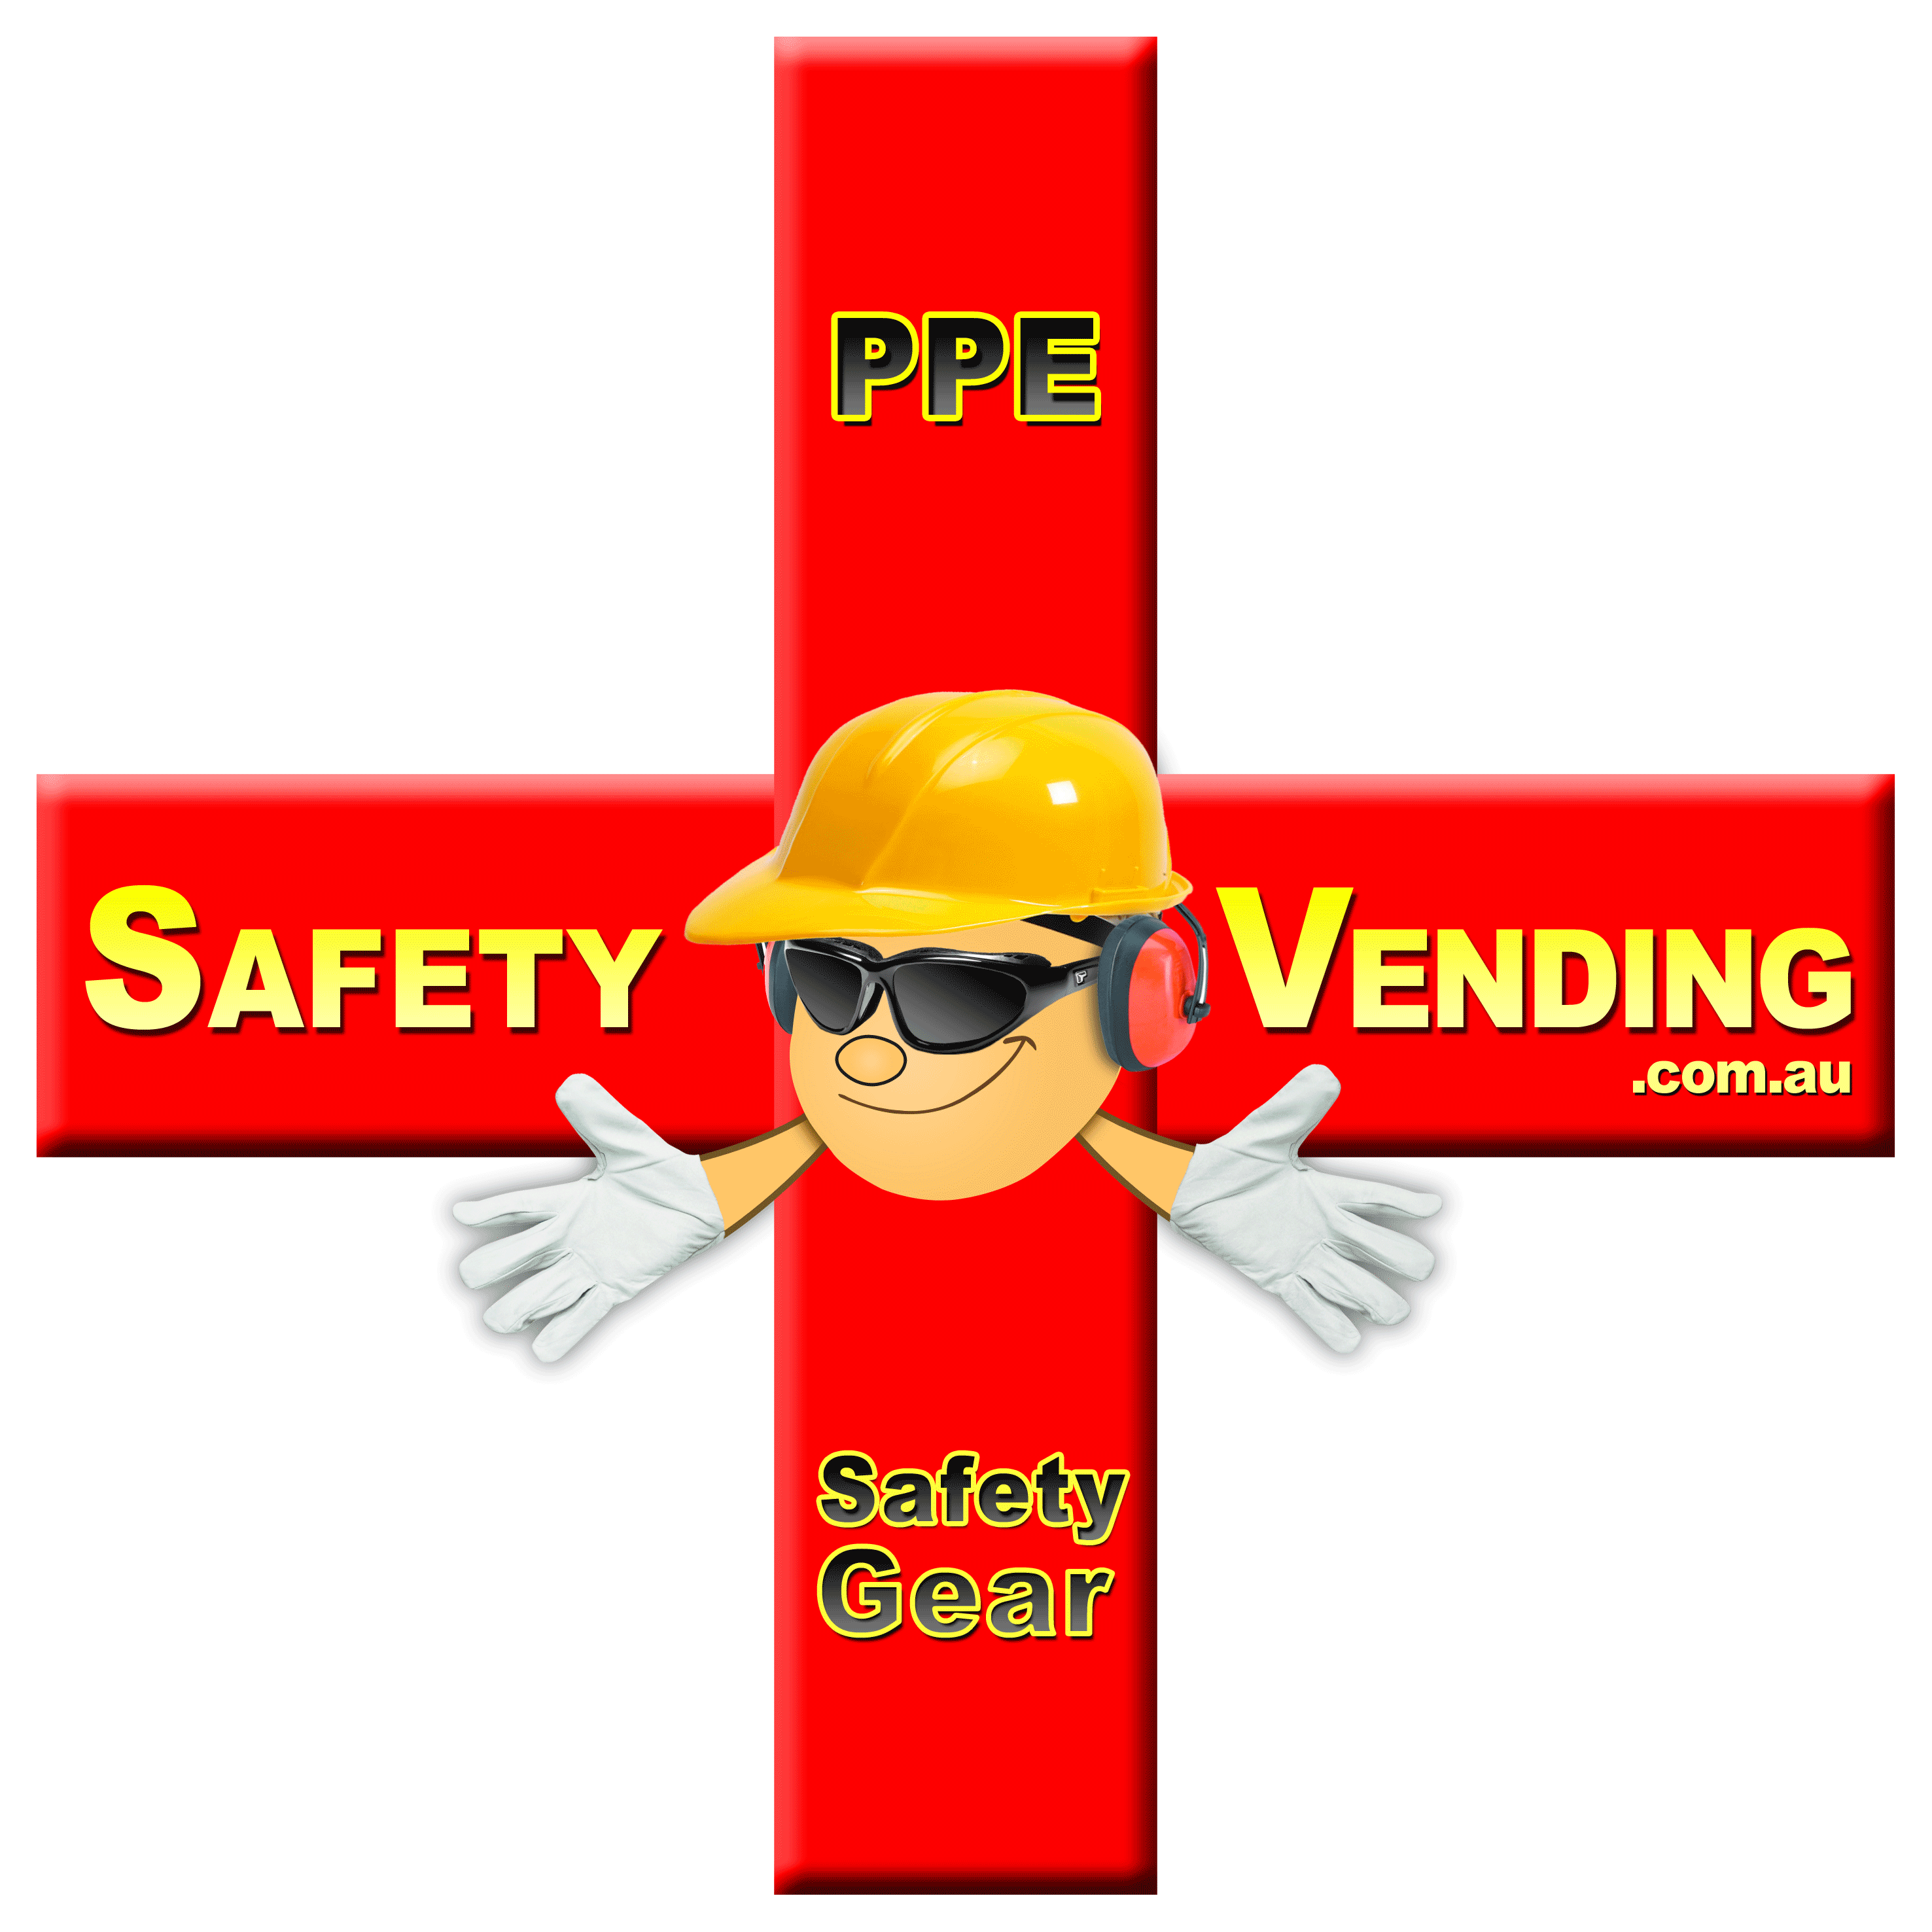 Safety Vending - for all your PPE needs